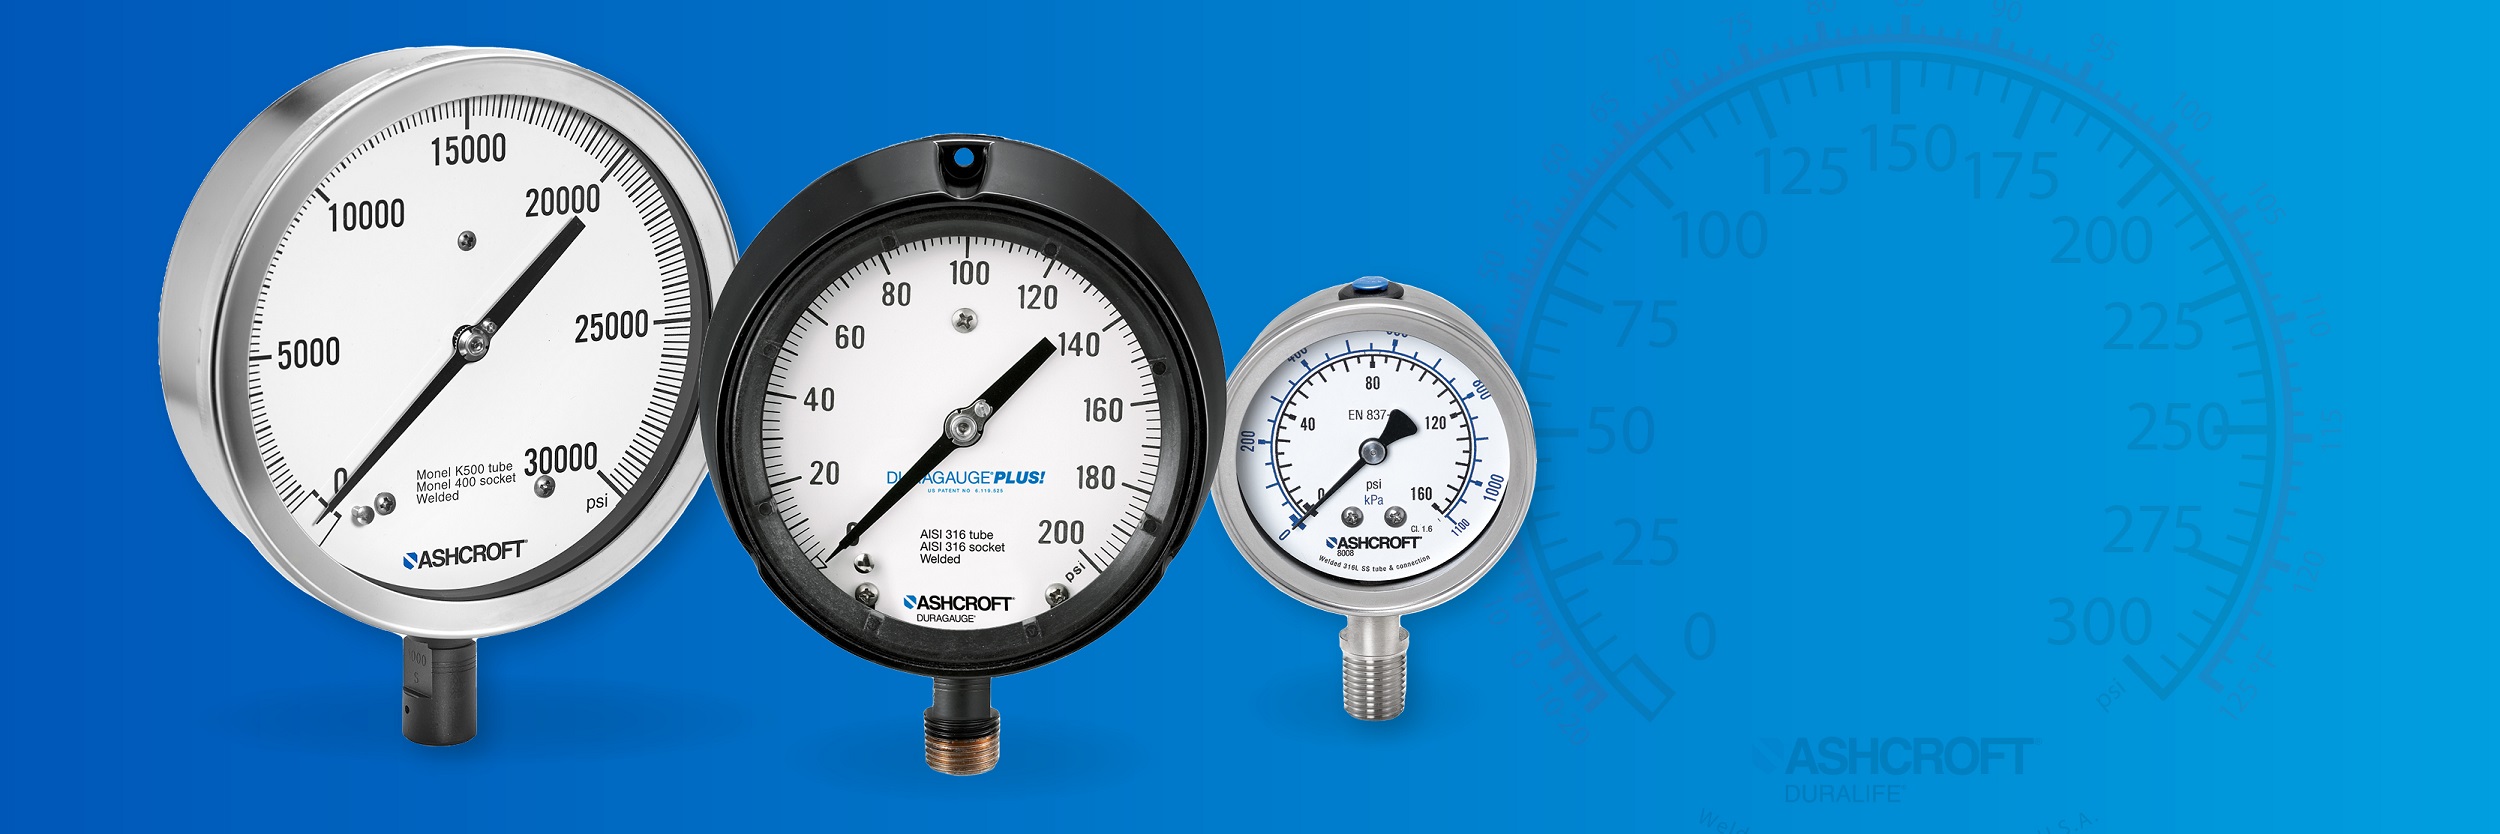 Choosing the Right Pressure Gauge Dial Size